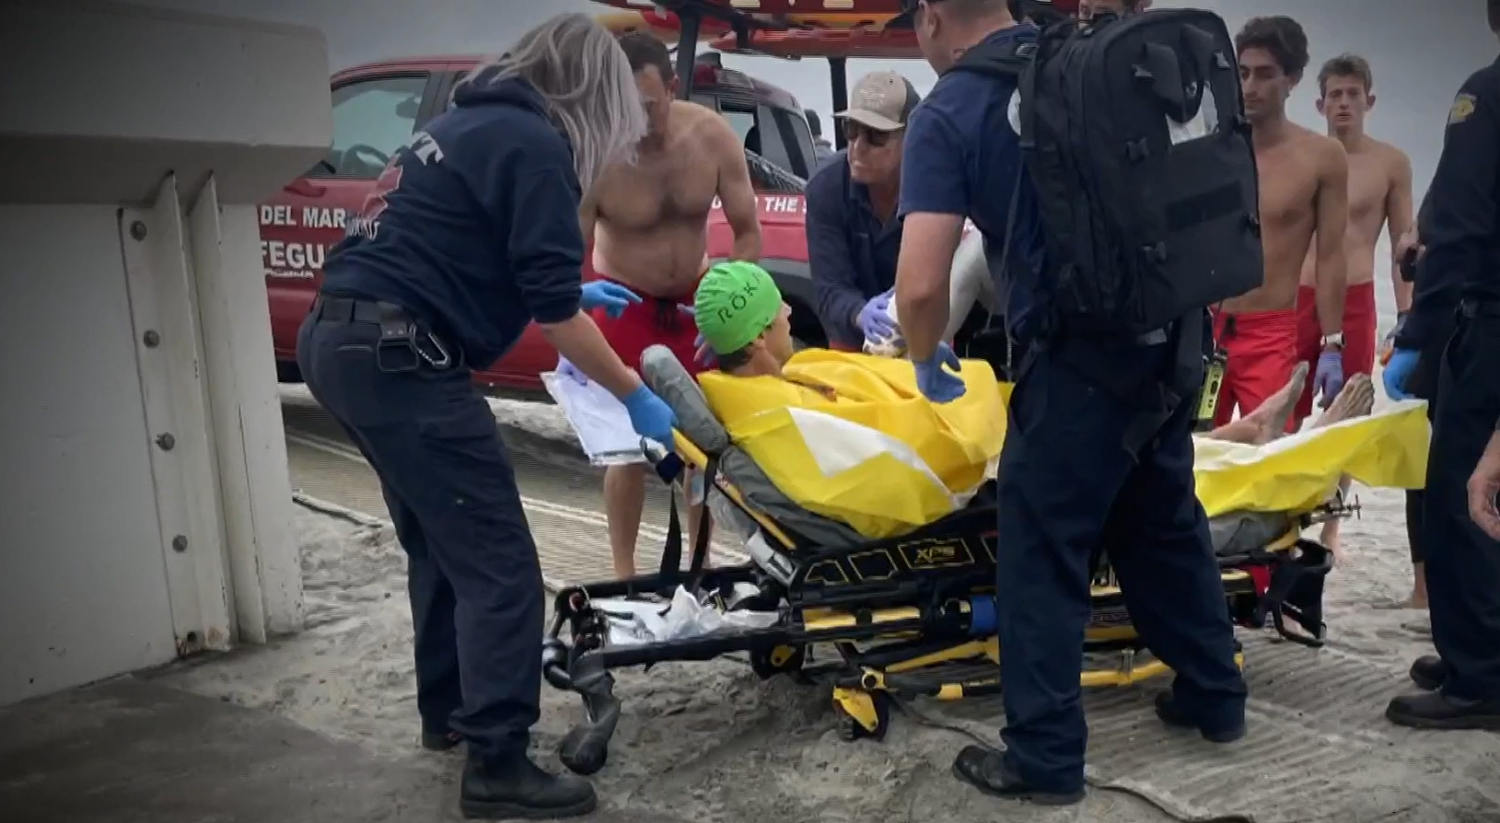 Shark attack victim punched it in the face before he was rescued, friend says